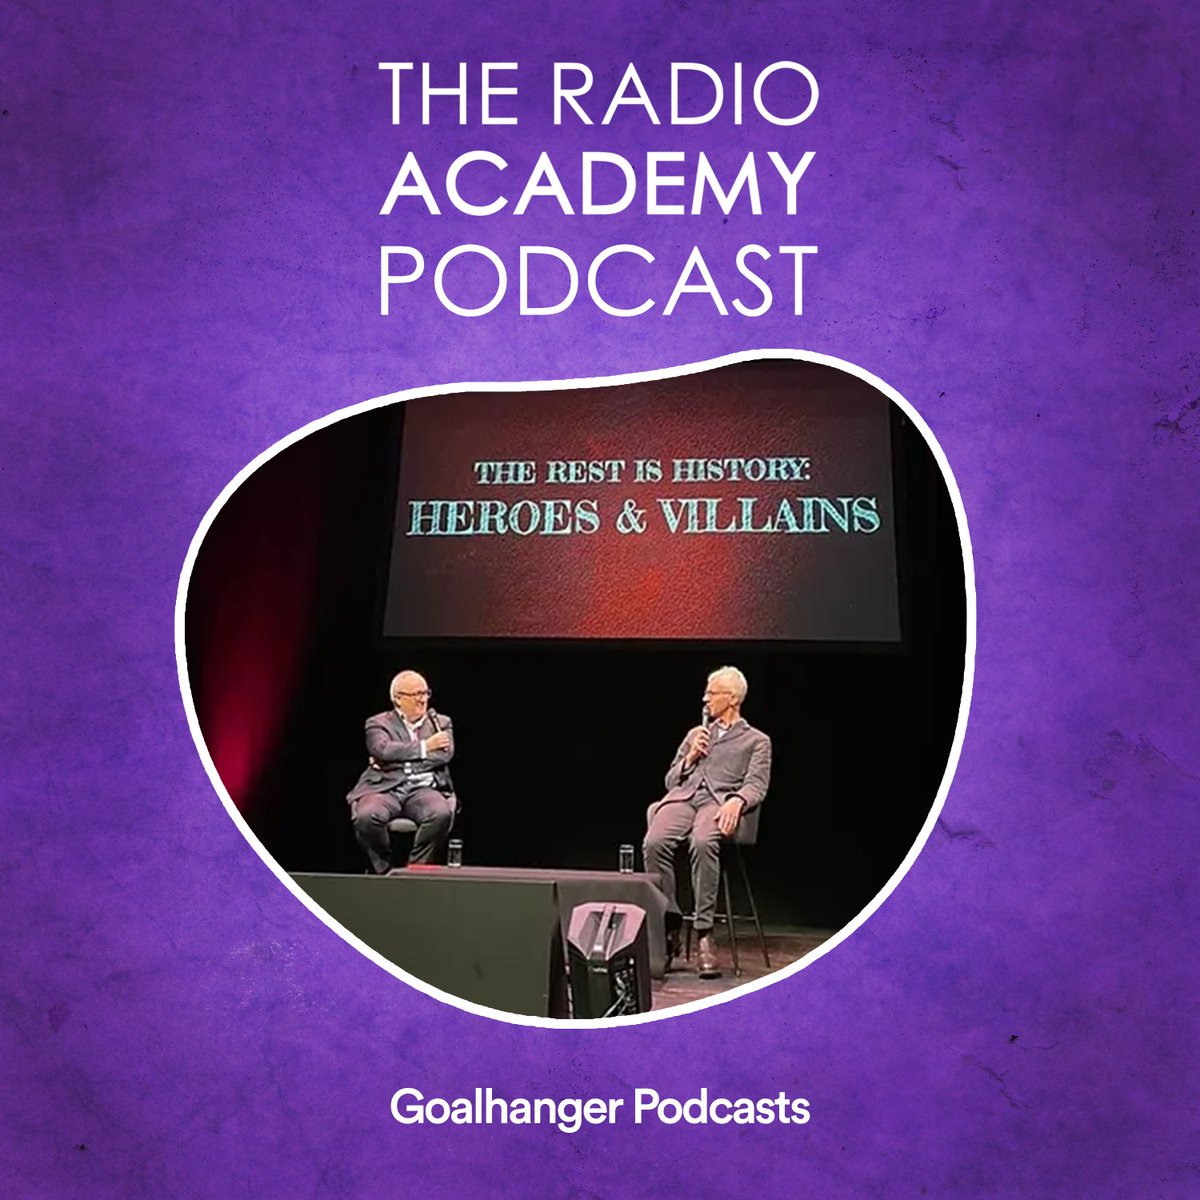 We're talking podcasts! Tony Pastor, one of @GoalhangerPods founders, chats to host @georgyjamieson about how the brand has accelerated in the last 6 months, what sets their podcasts apart and how super fans are now a big part of what they do. 🎧podfollow.com/radioacademy